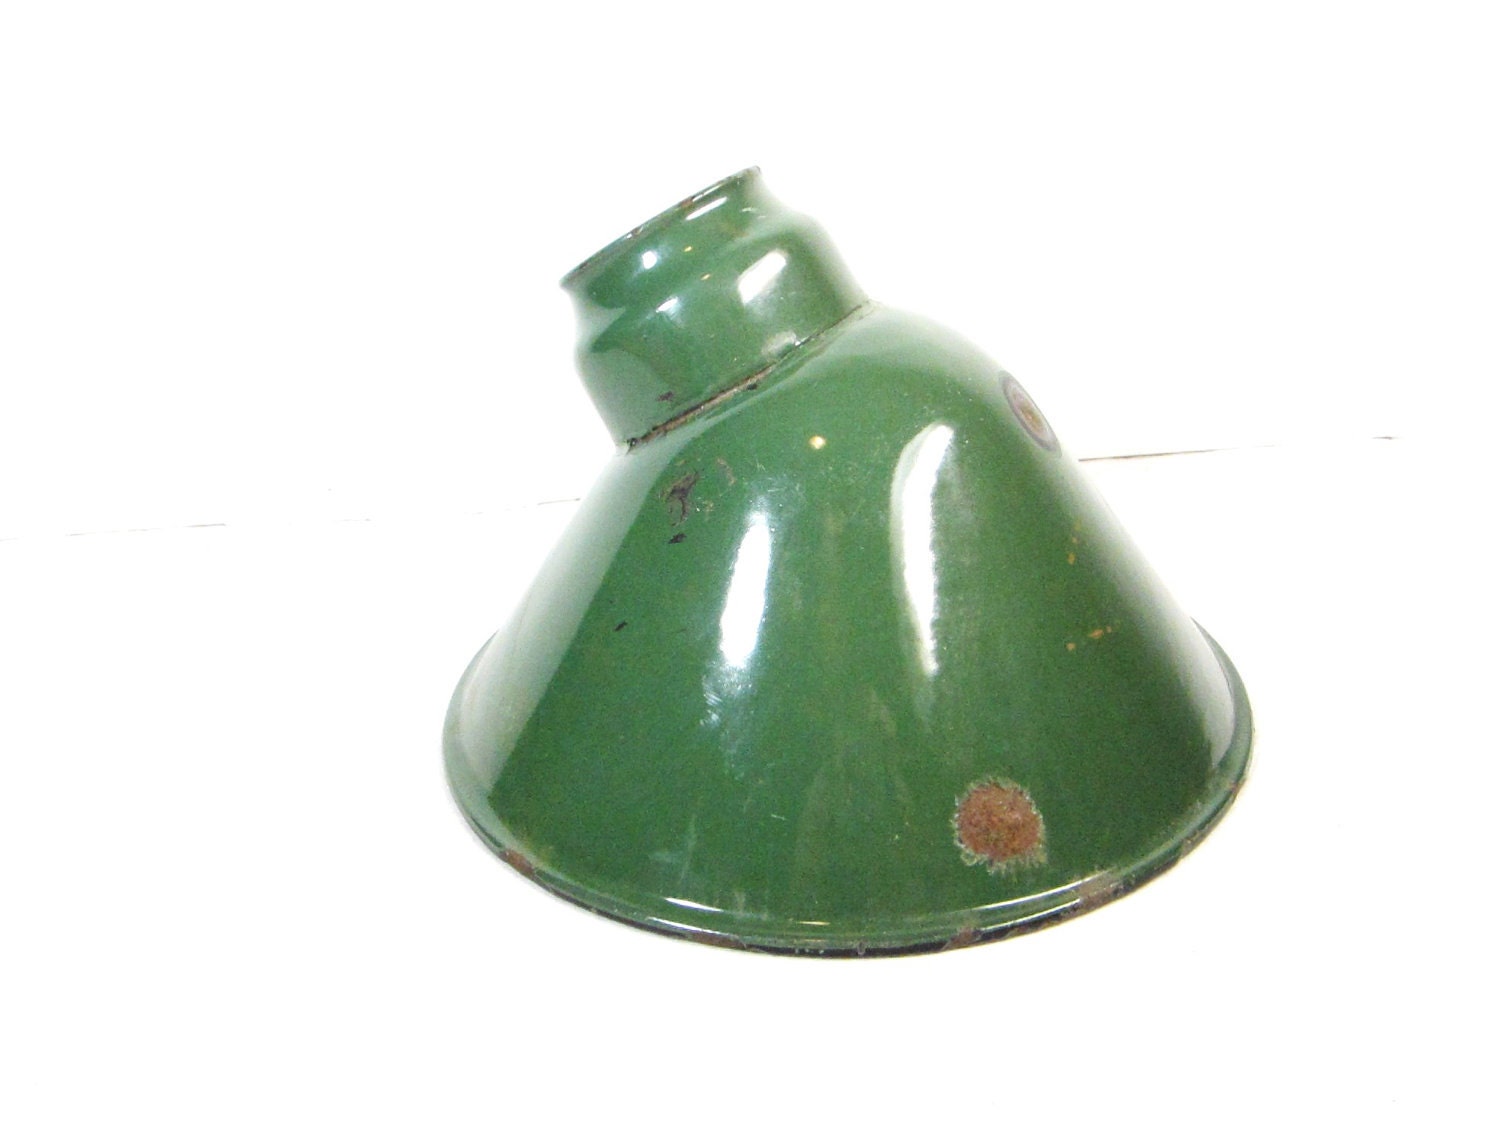  Lamp Shades on Antique Green Porcelain Light Shade Industrial Metal Lamp Shade Old